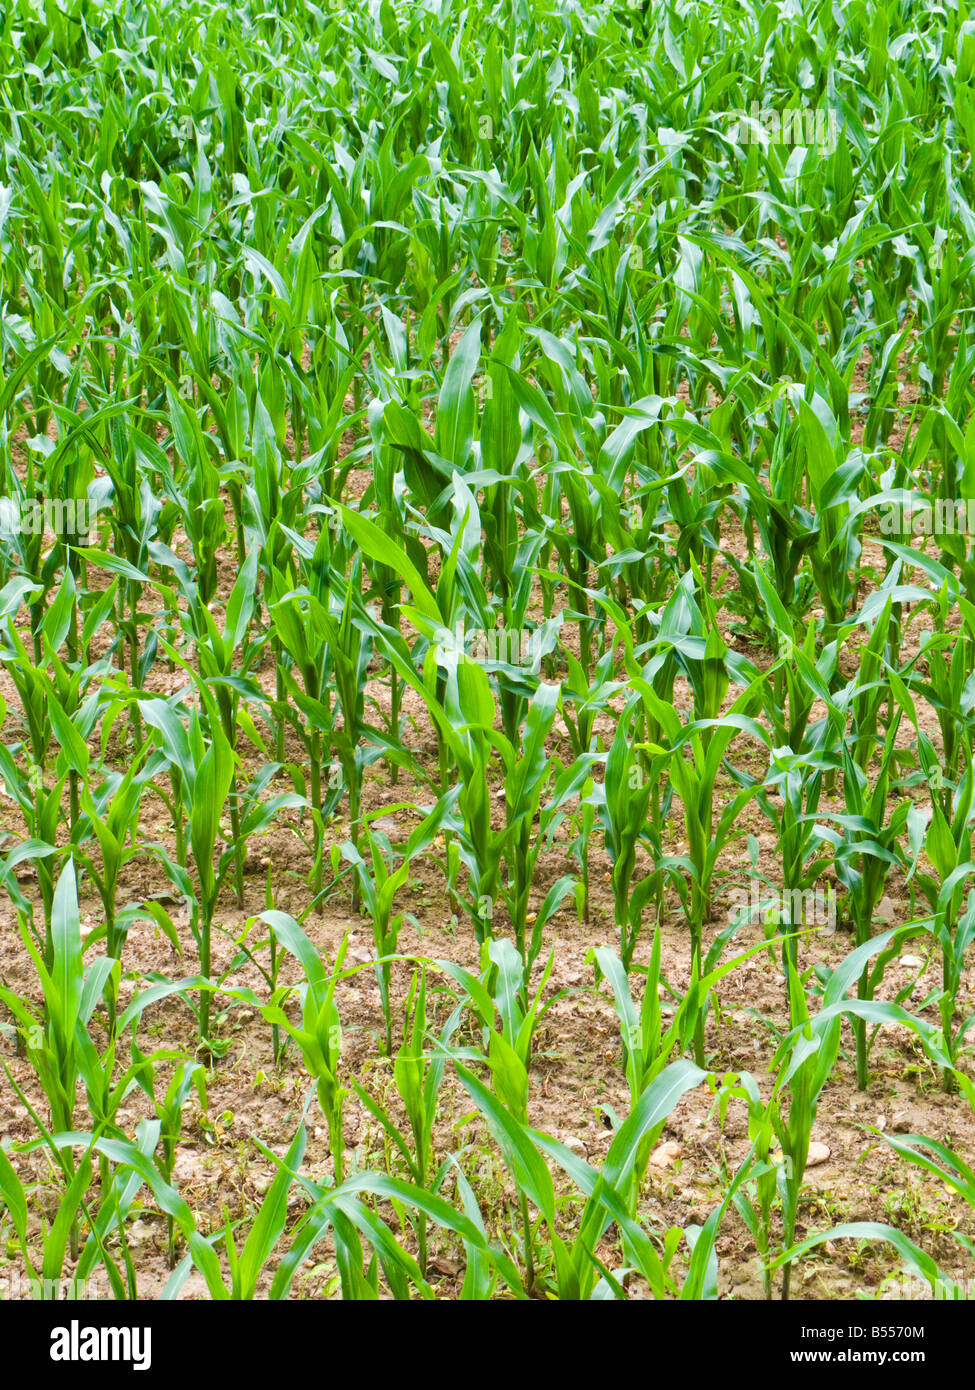 Young new Maize plants in summer growing in a field Stock Photo